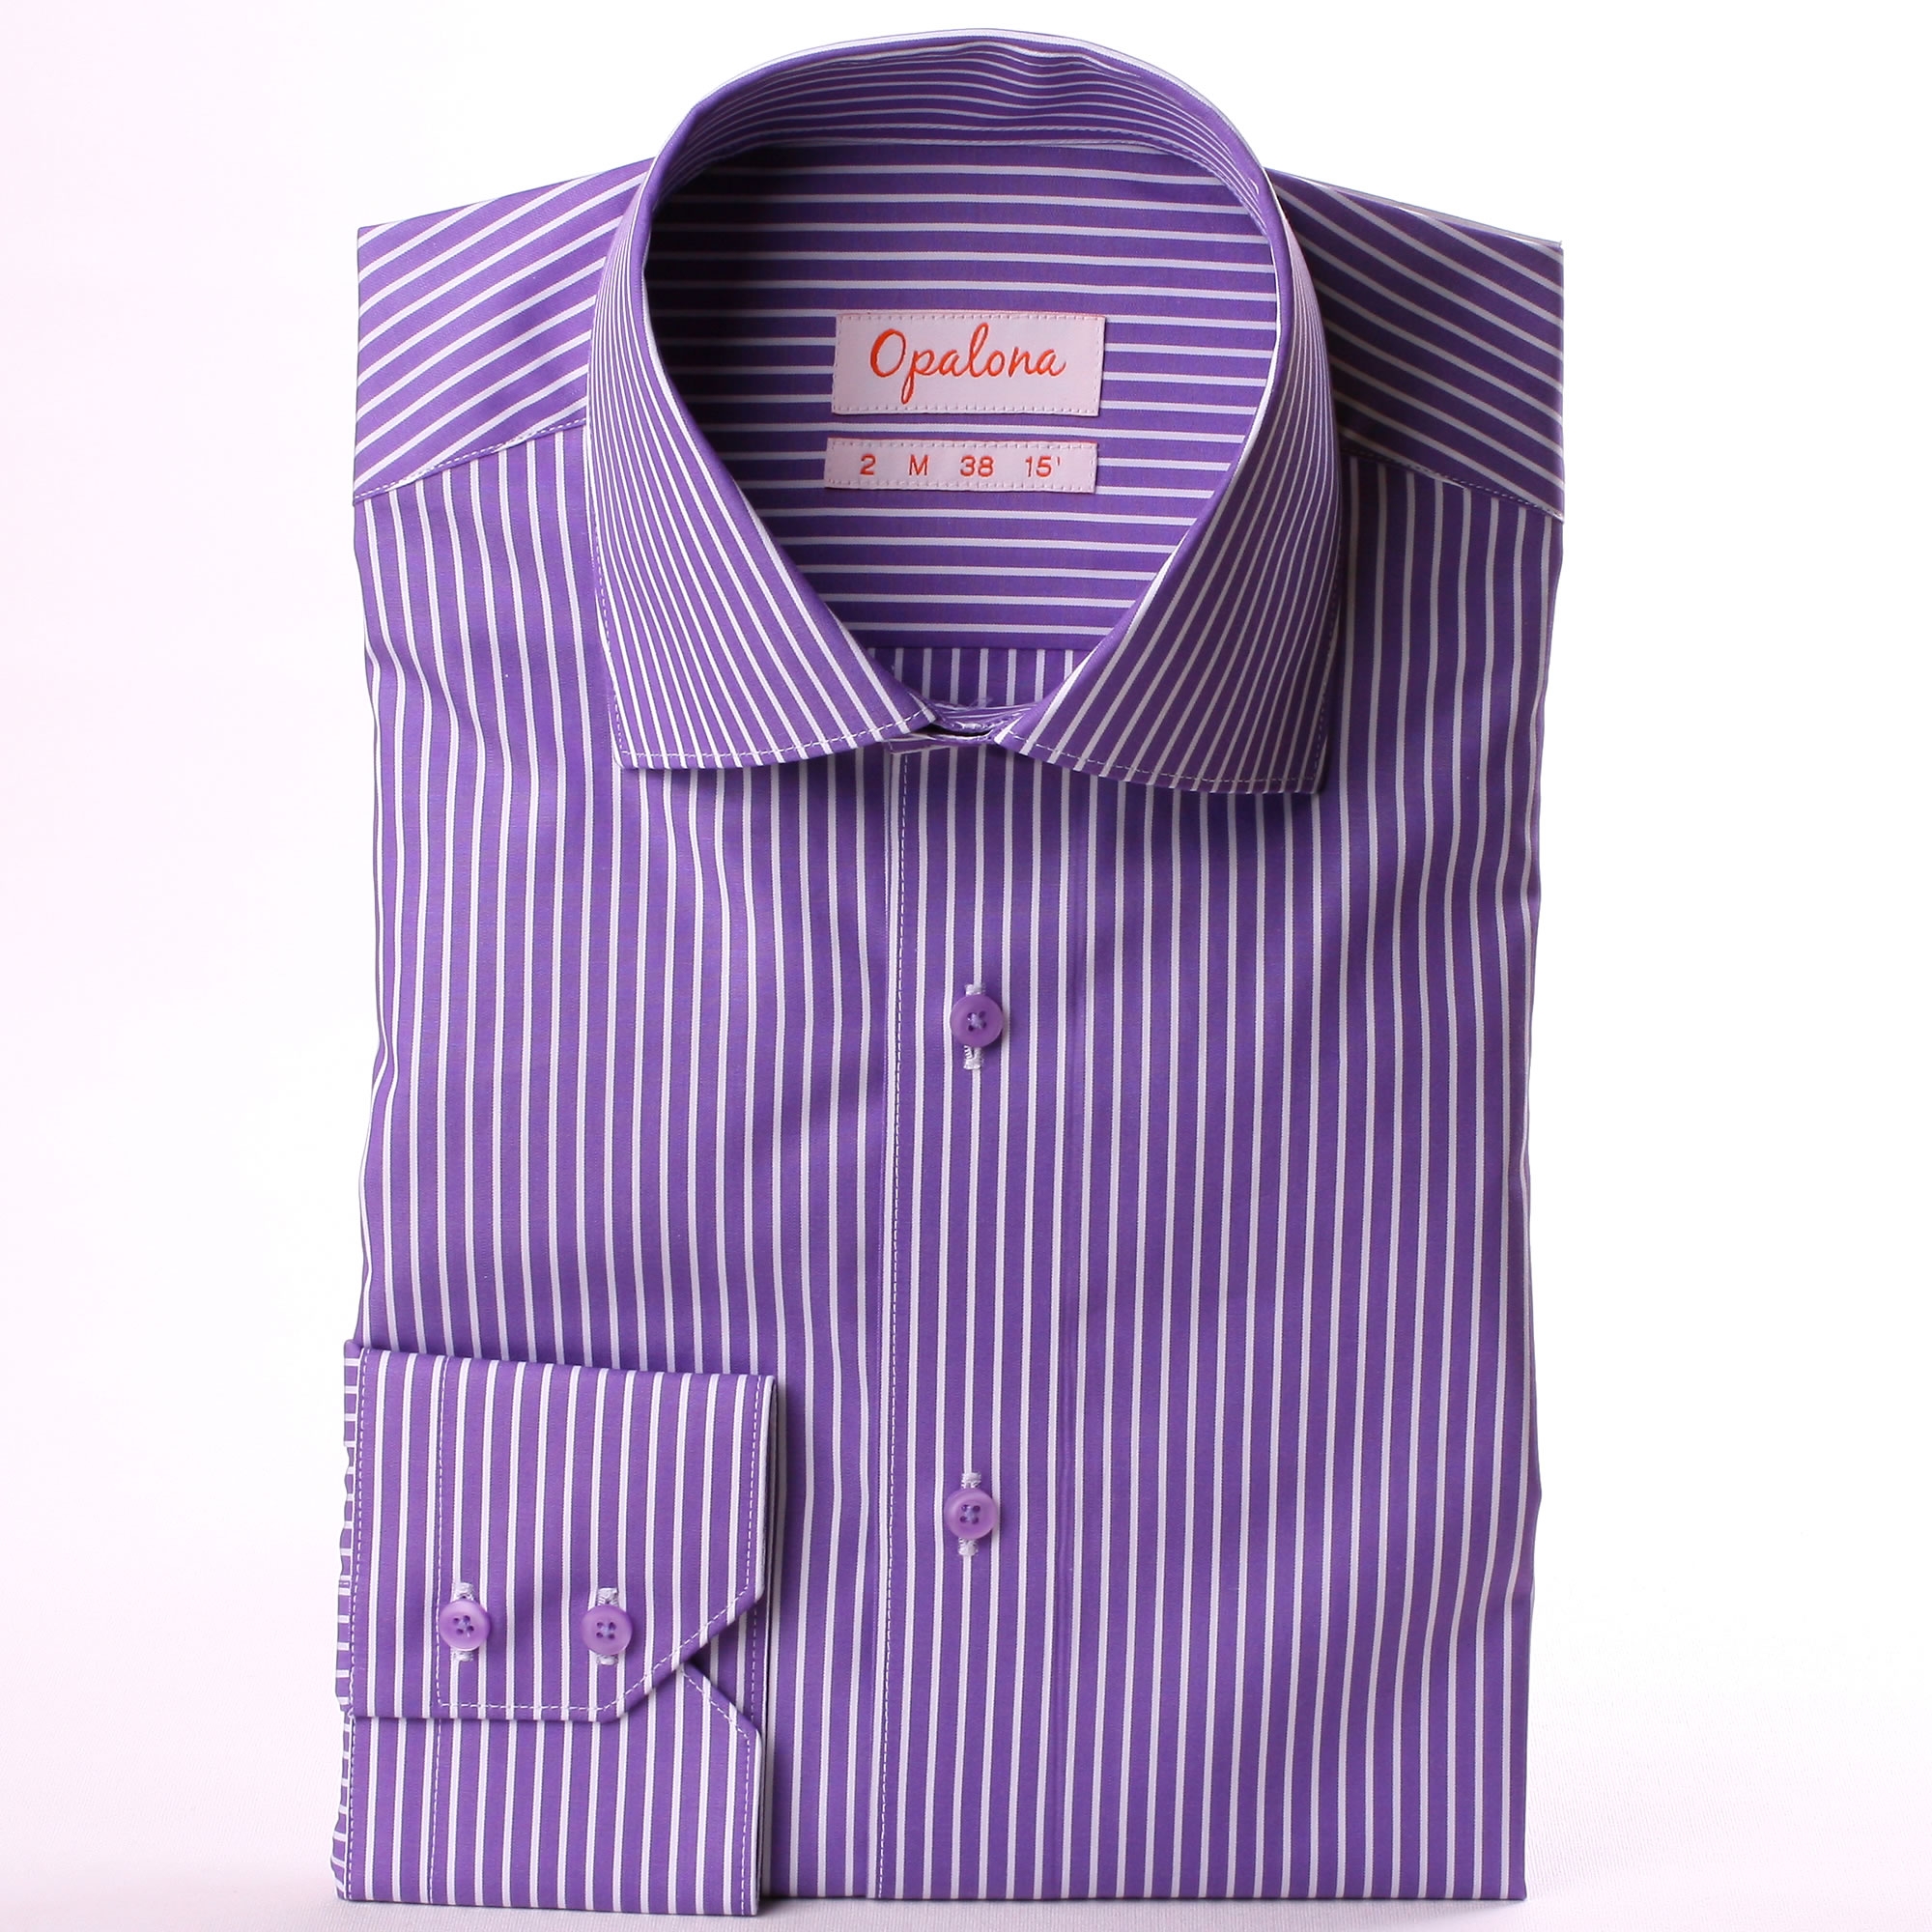 Purple shirt with white stripes